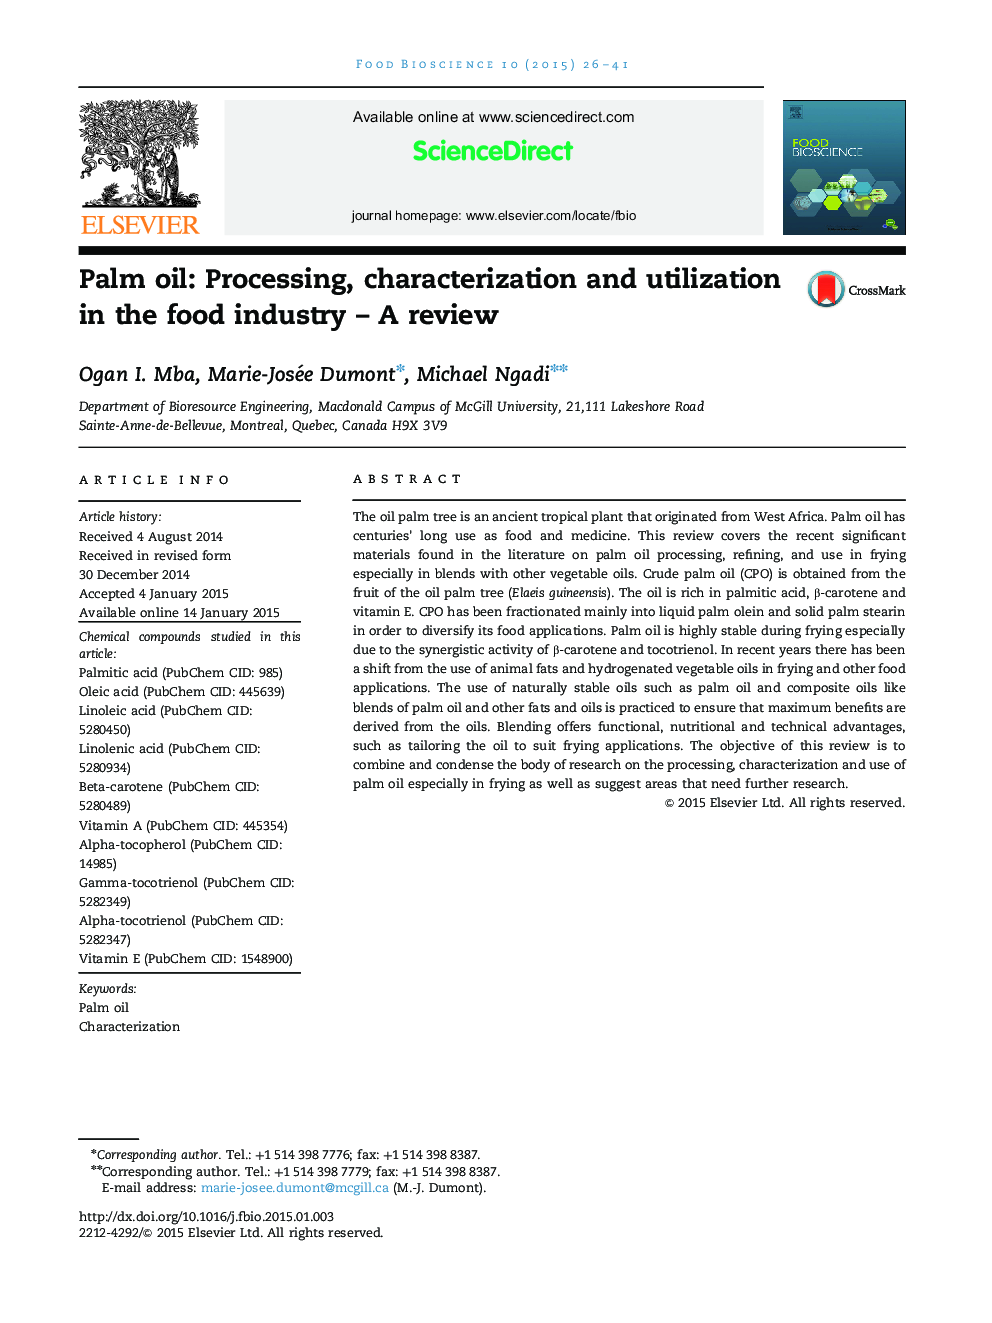 Palm oil: Processing, characterization and utilization in the food industry – A review